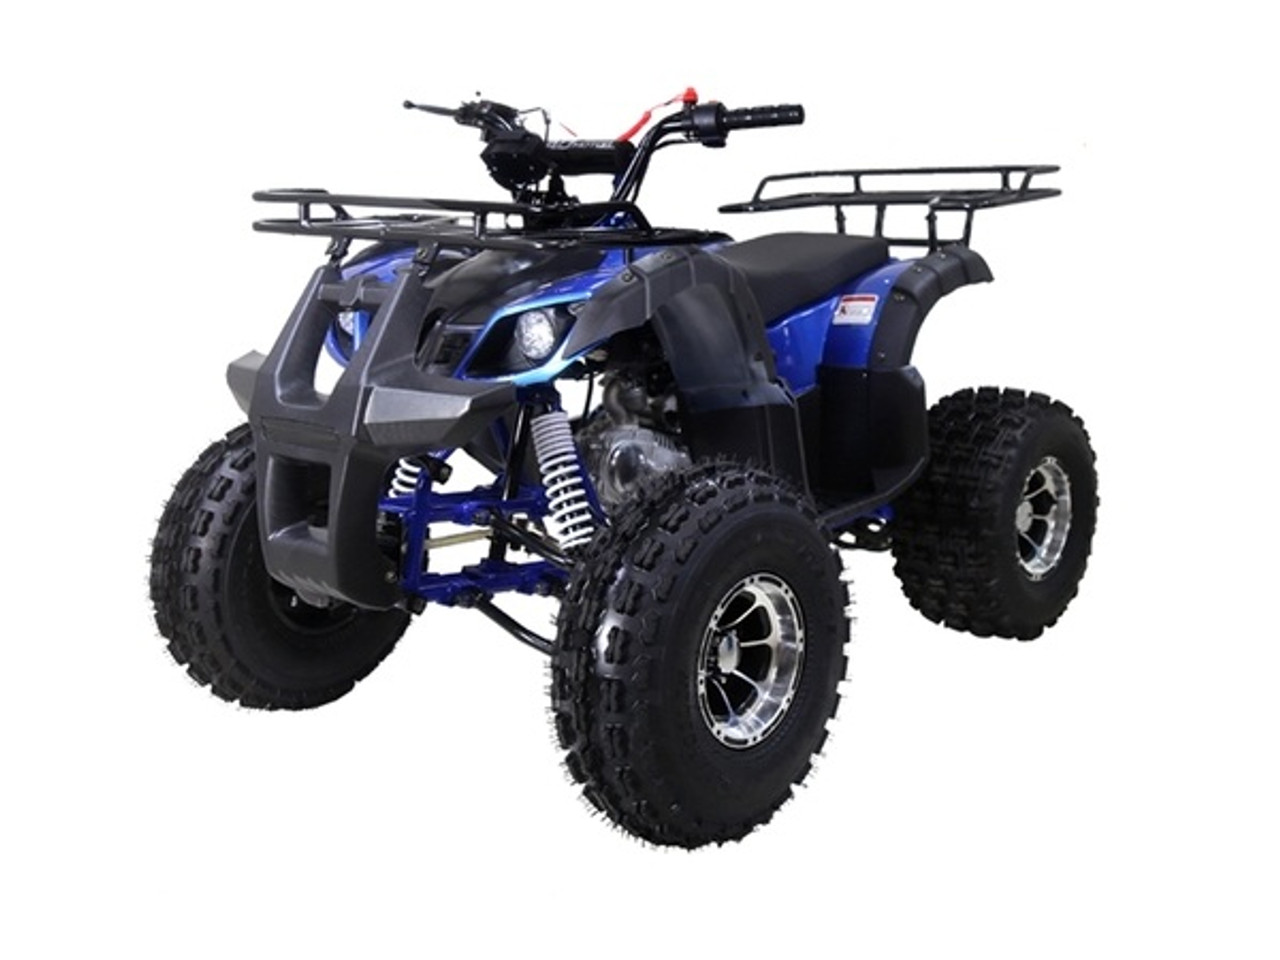 TaoTao 125CC NEW TFORCE Mid Size ATV, Automatic with Reverse, Air Cooled, 4-Stroke, 1-Cylinder